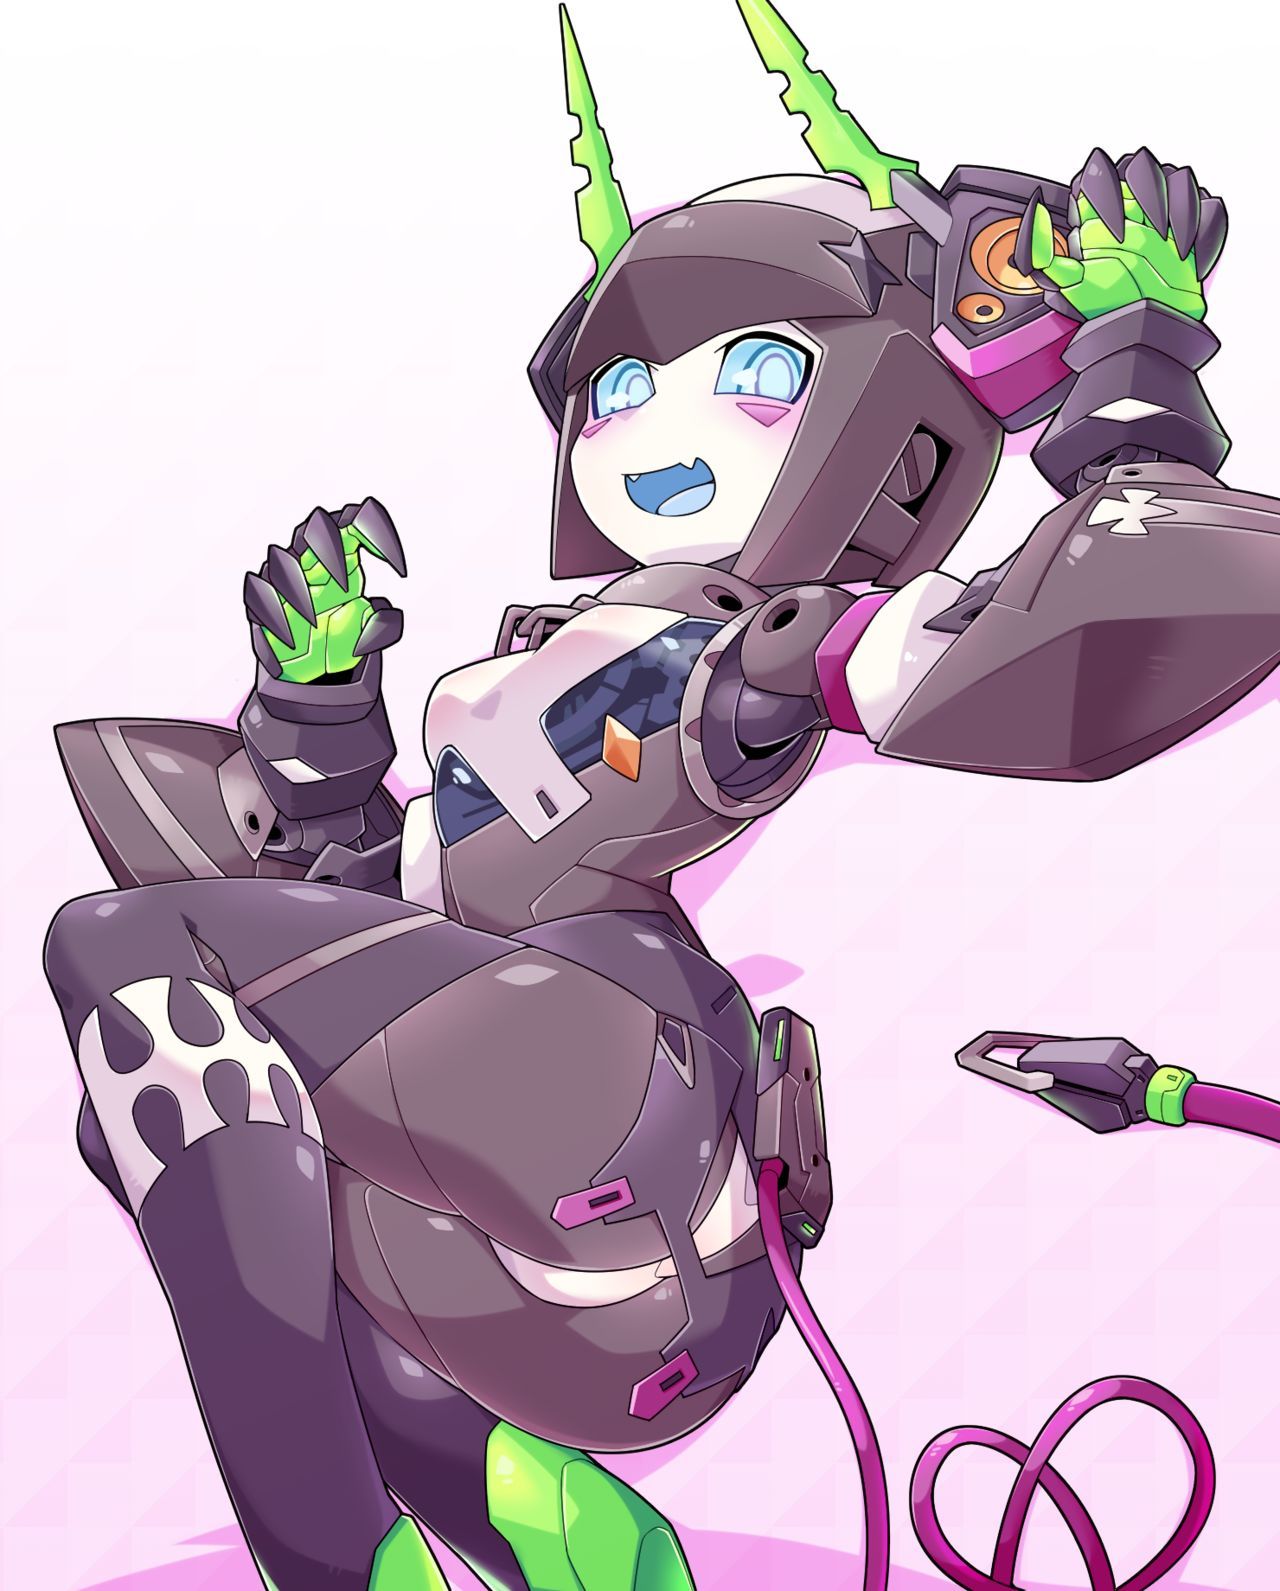 [Pixiv] kni-droid (Kにぃー, weis2626) (Pixiv ID: 1937581) 8